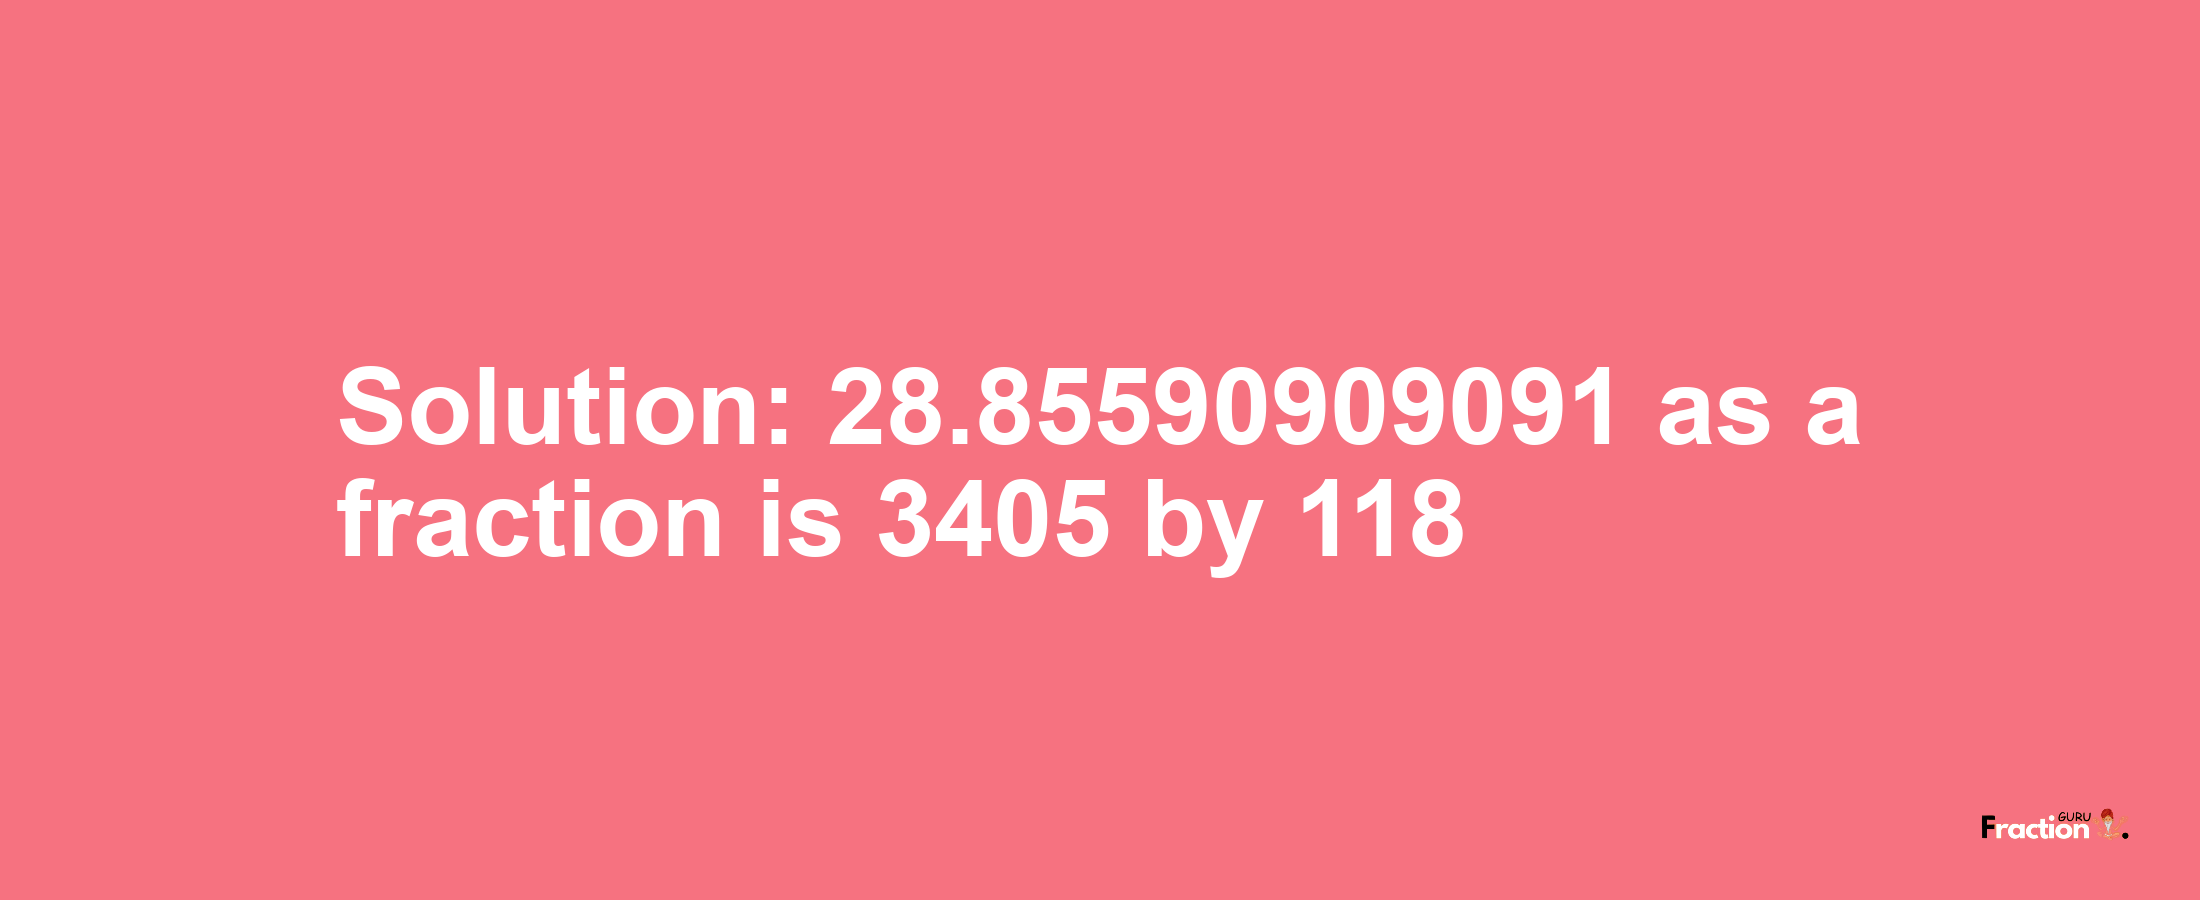 Solution:28.85590909091 as a fraction is 3405/118